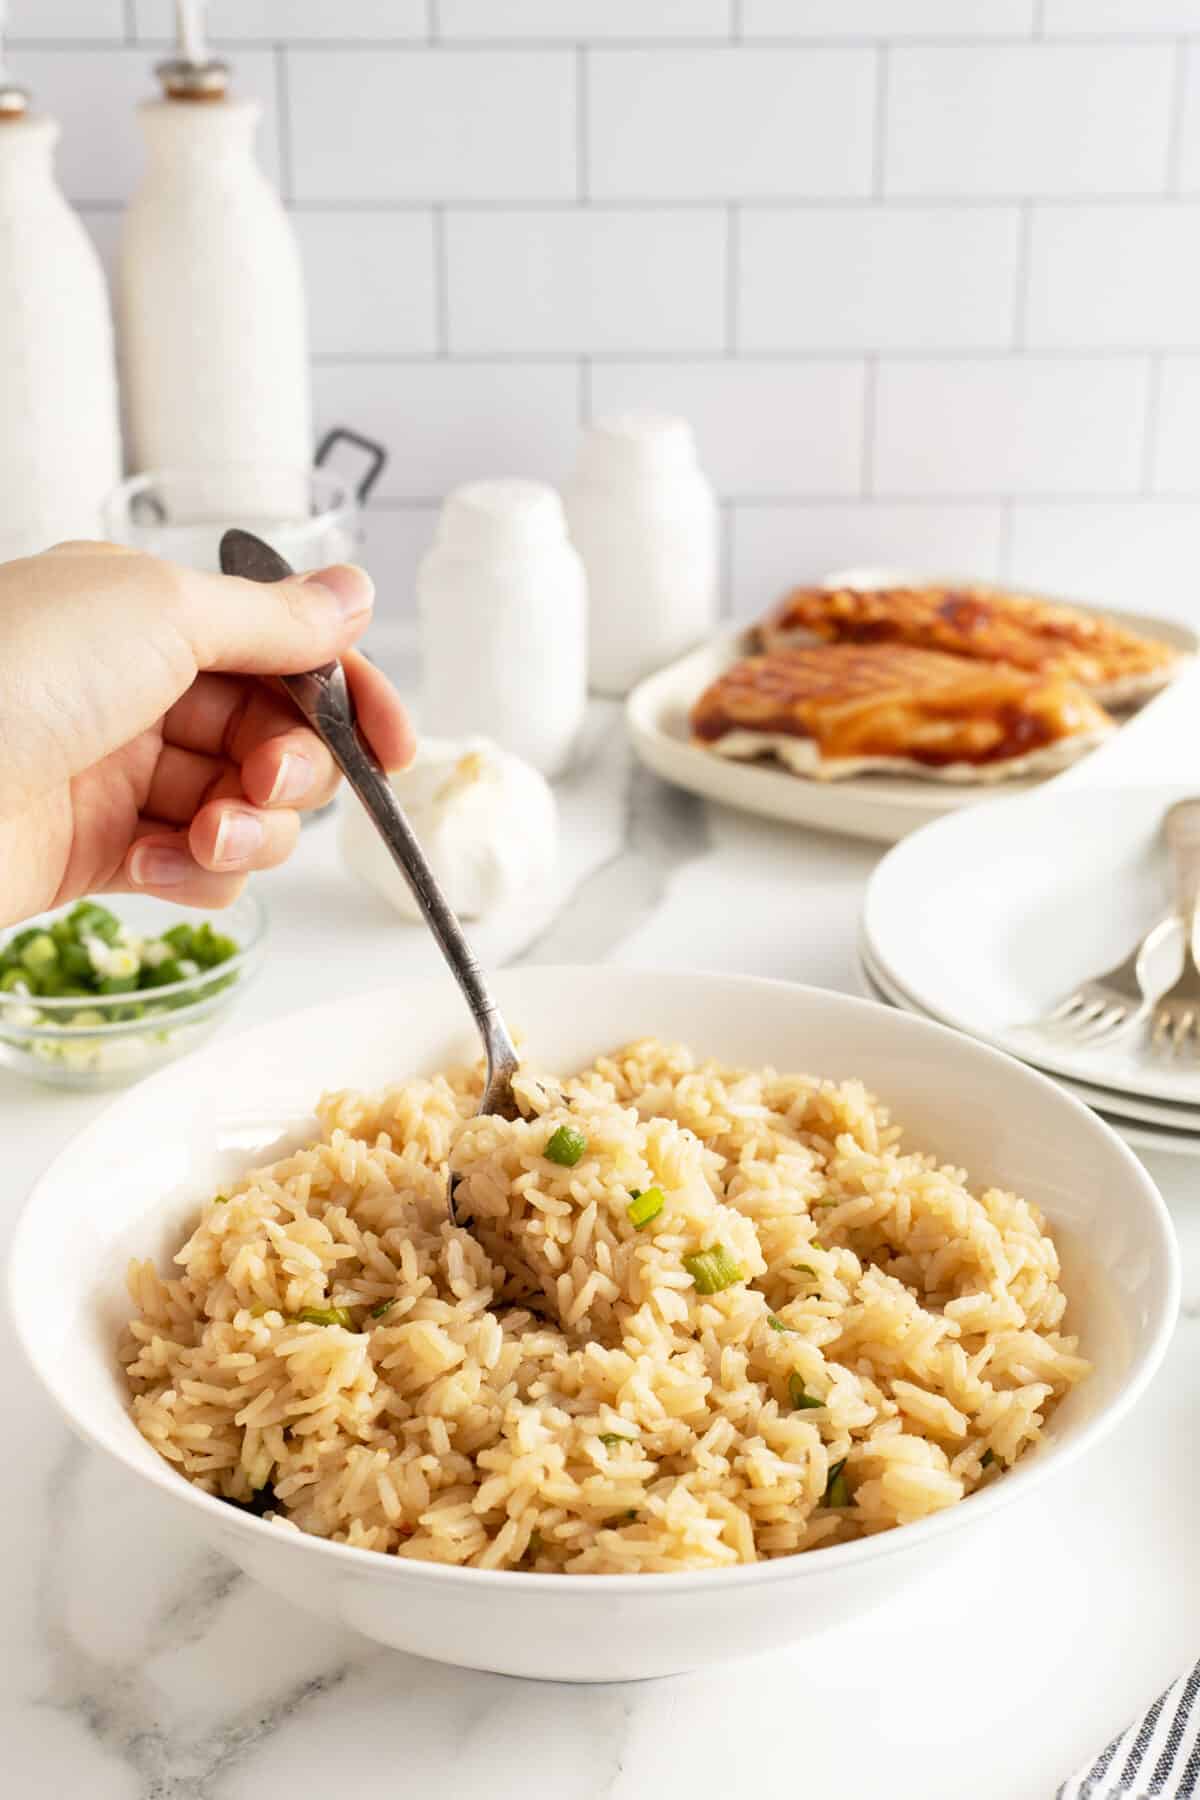 Teriyaki rice in a bowl with a spoon being lifted